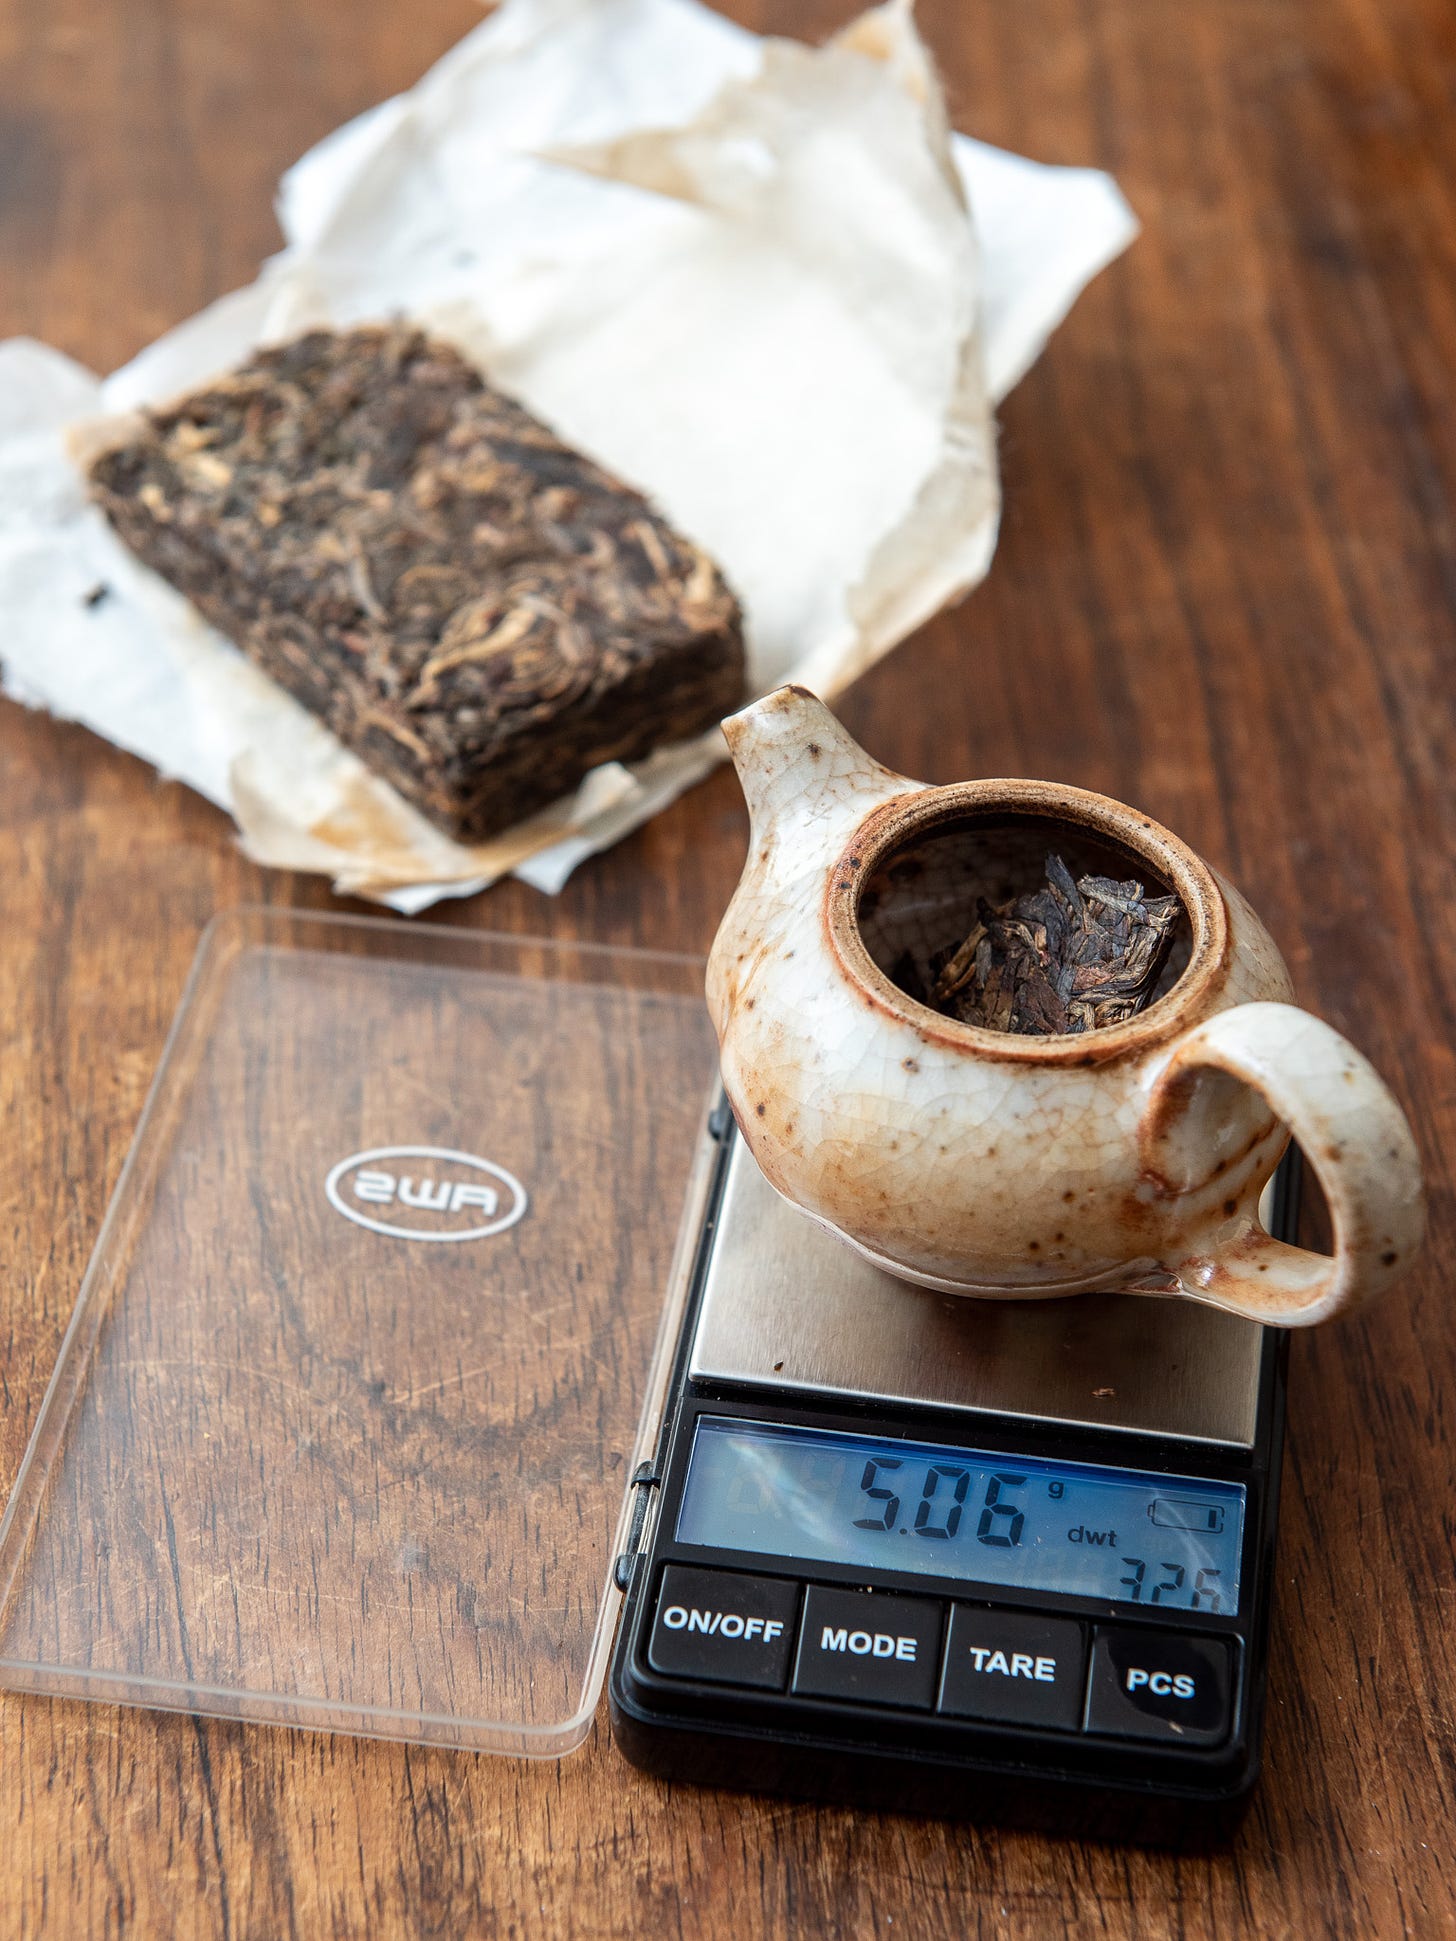 ID: Teapot on gram scale showing 5 grams of tea, with brick in background